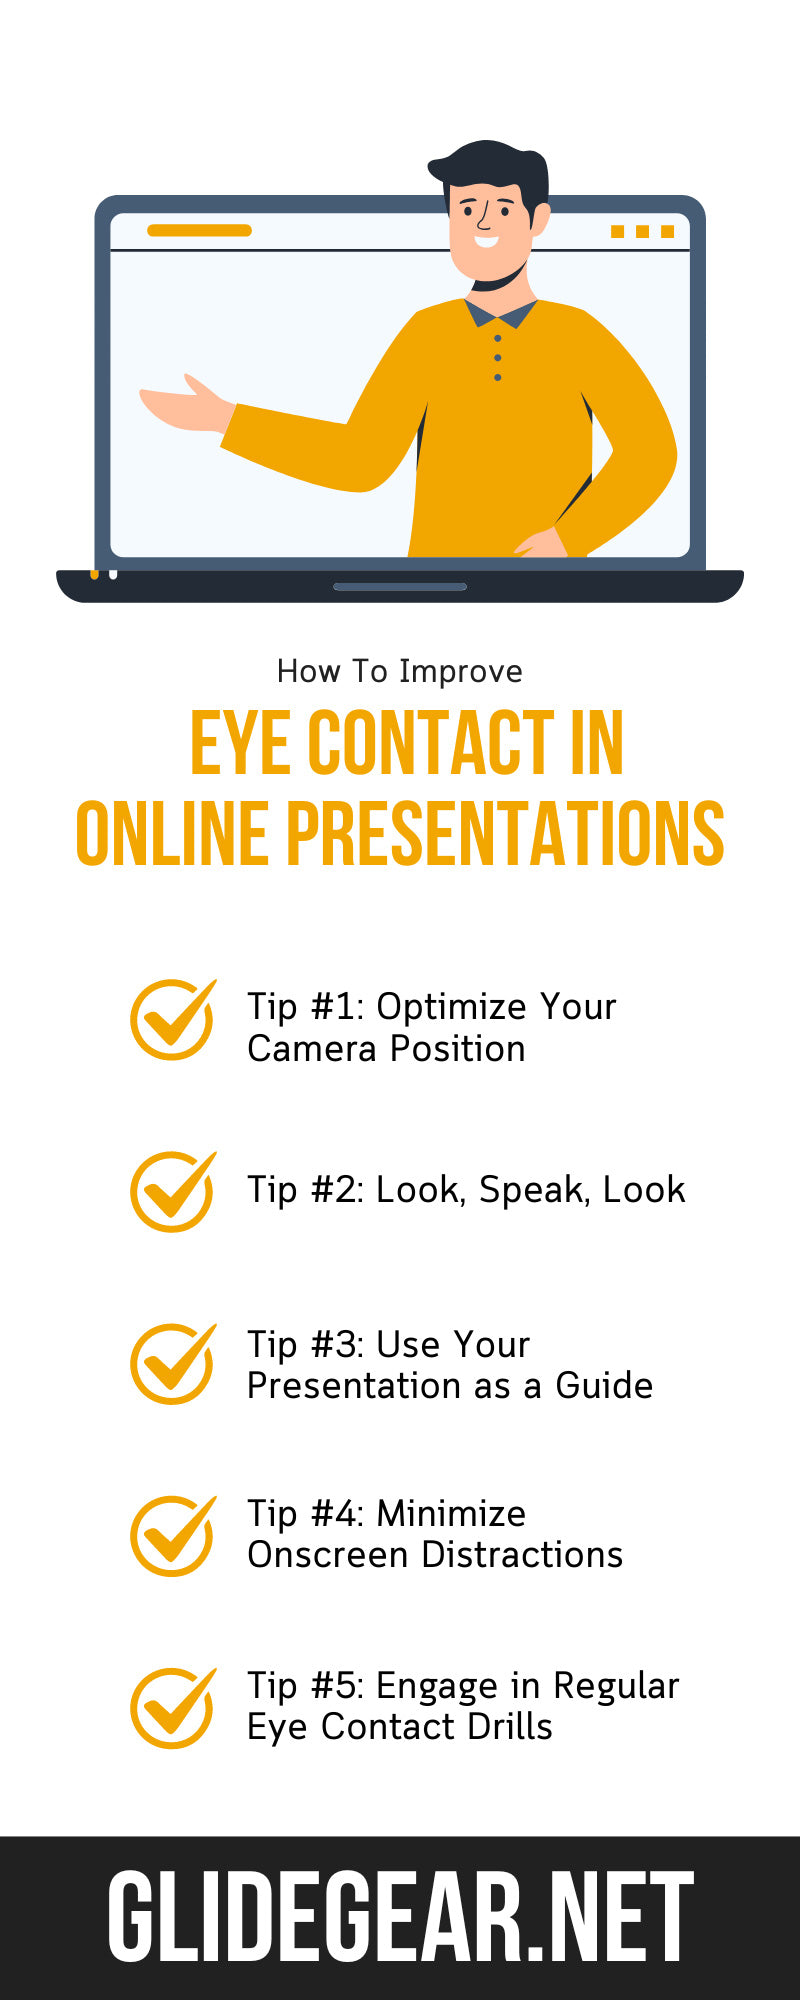 How To Improve Eye Contact in Online Presentations